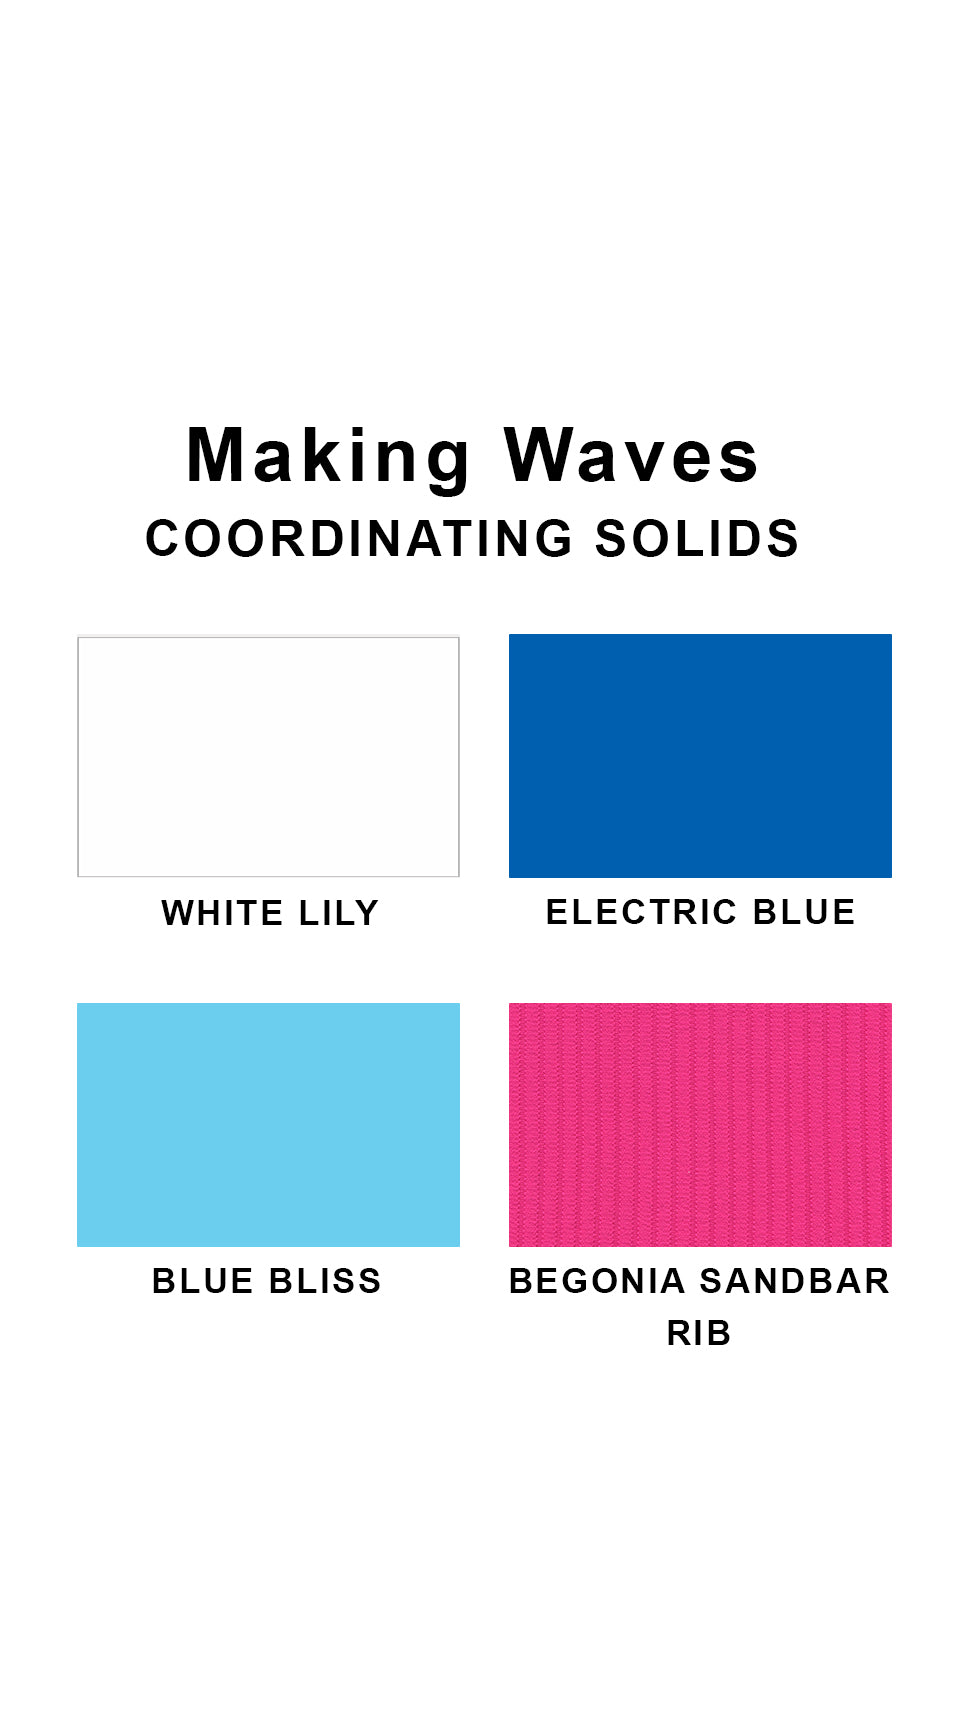 Coordinating solids chart for Making Waves swimsuit print: White Lily, Electric Blue, Blue Bliss and Begonia Sandbar Rib